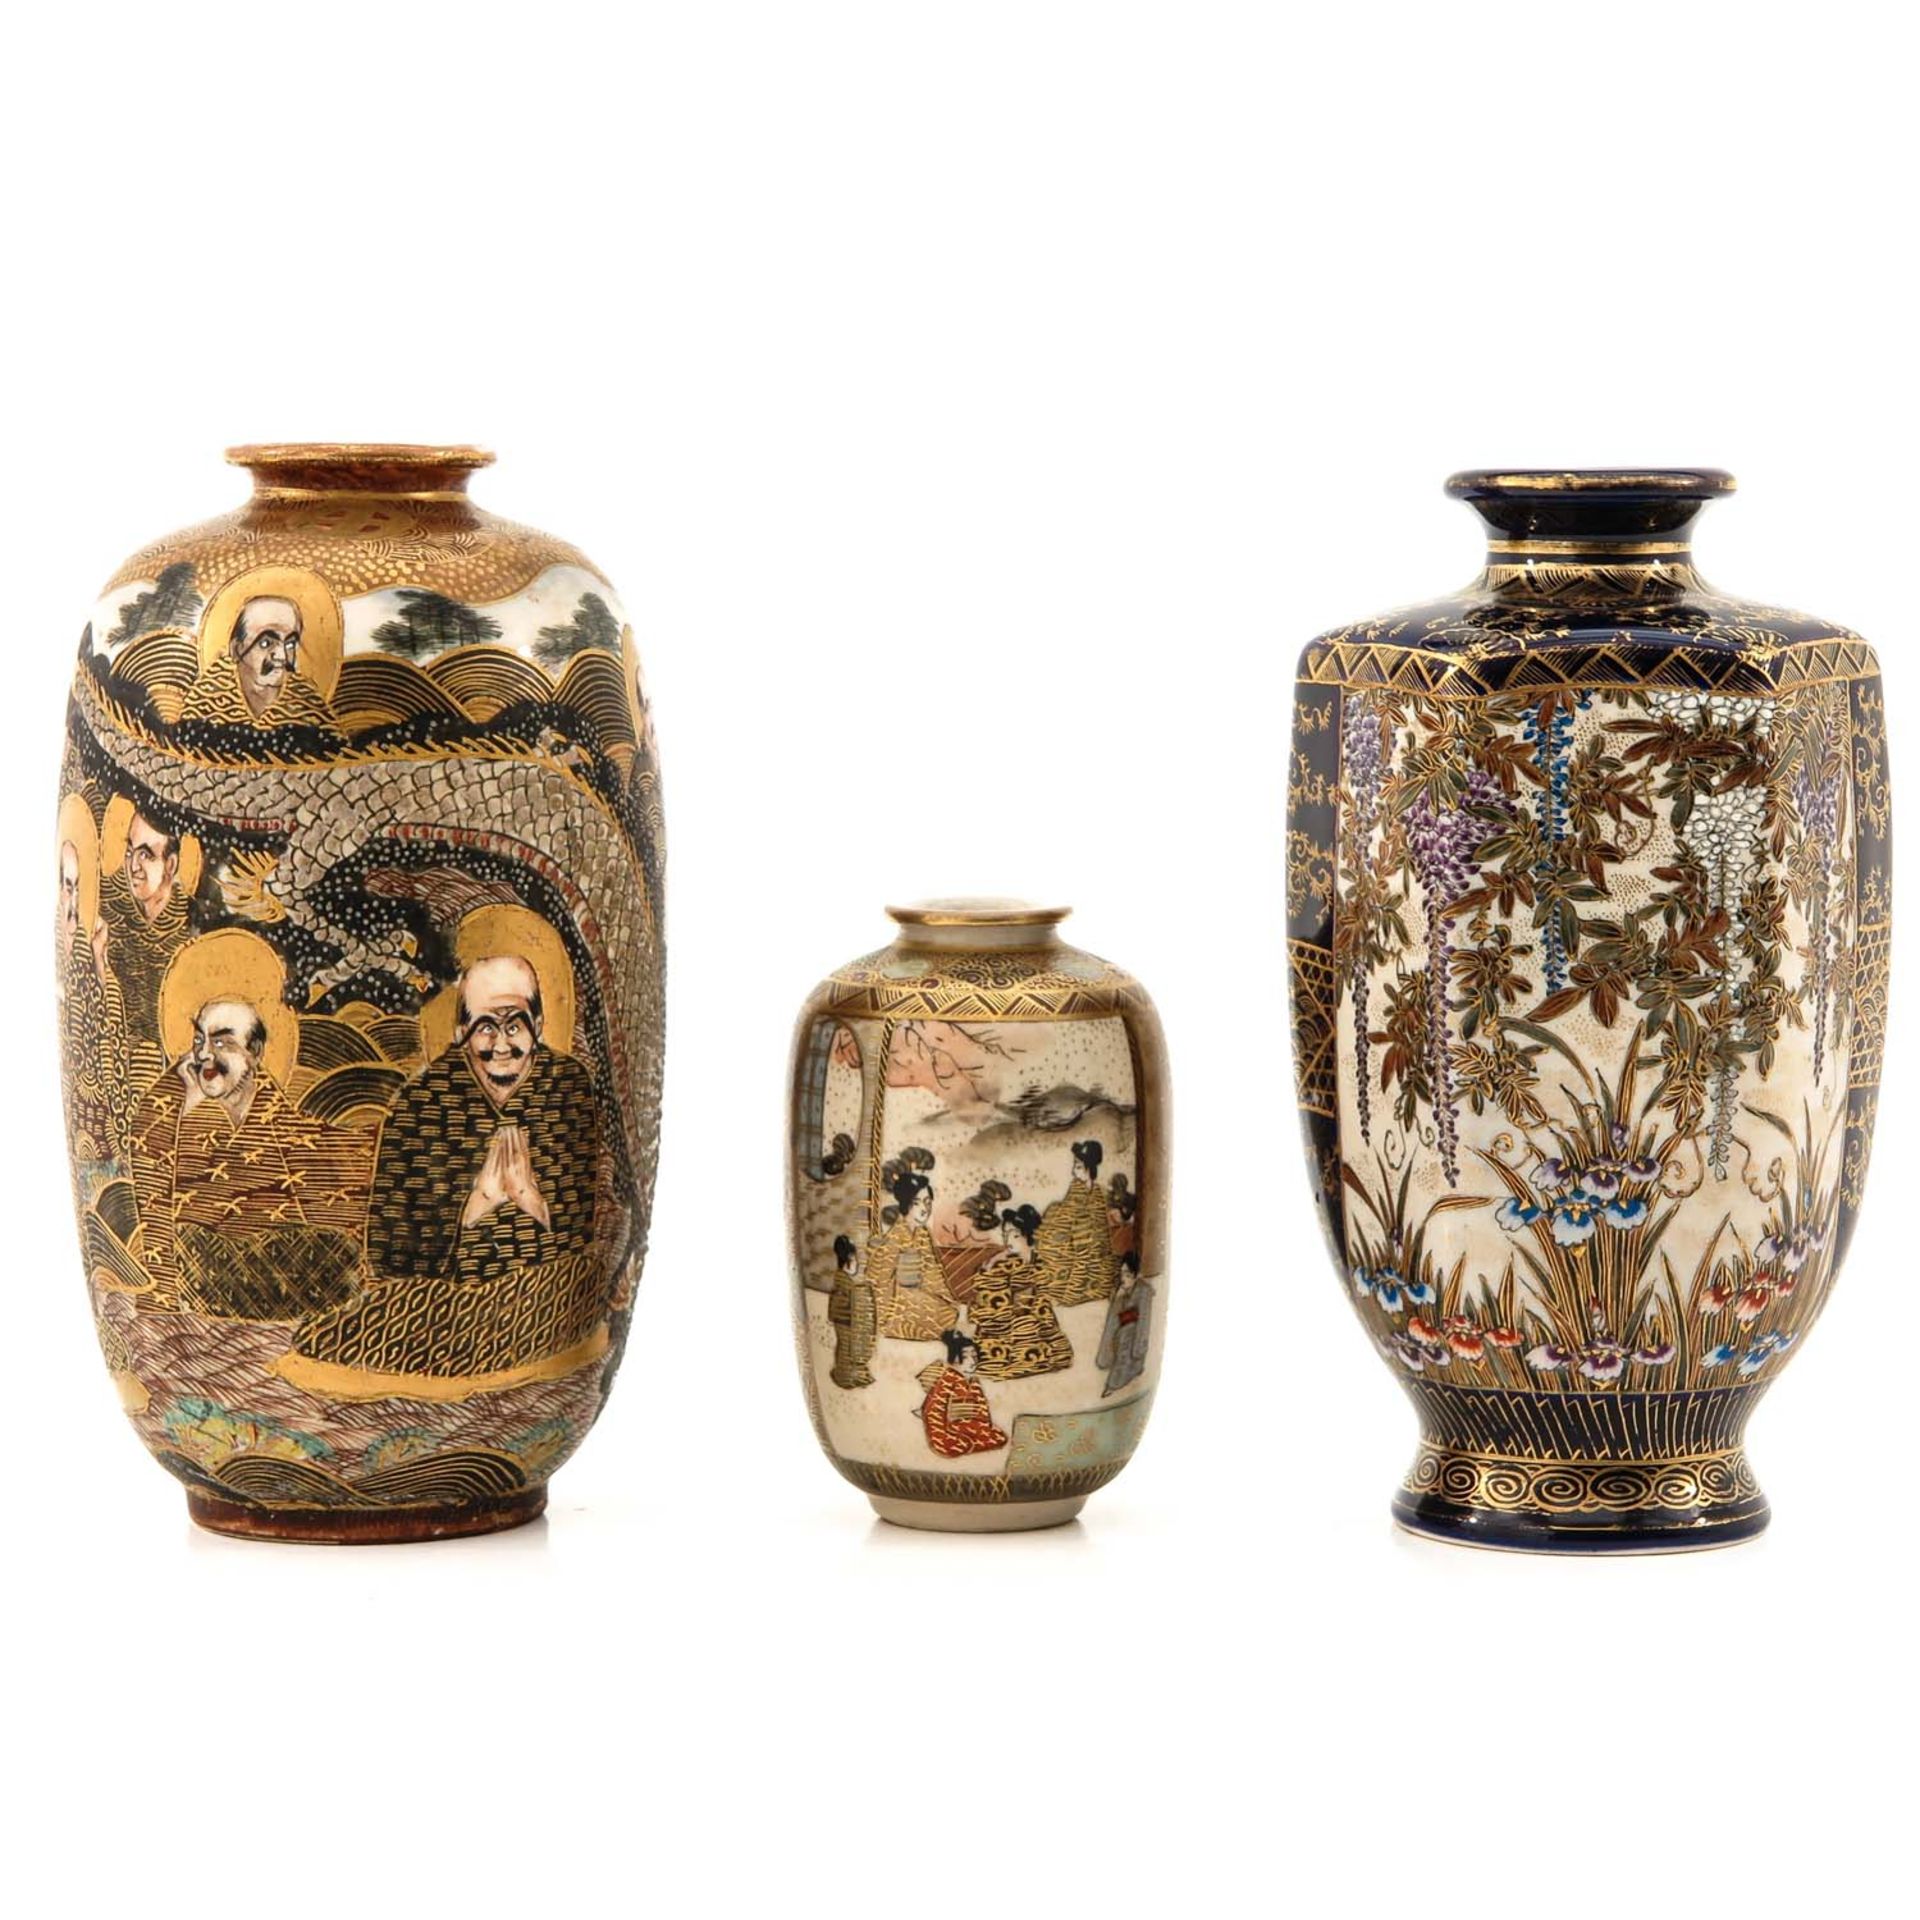 A Collection of 3 Satsuma Vases - Image 3 of 10